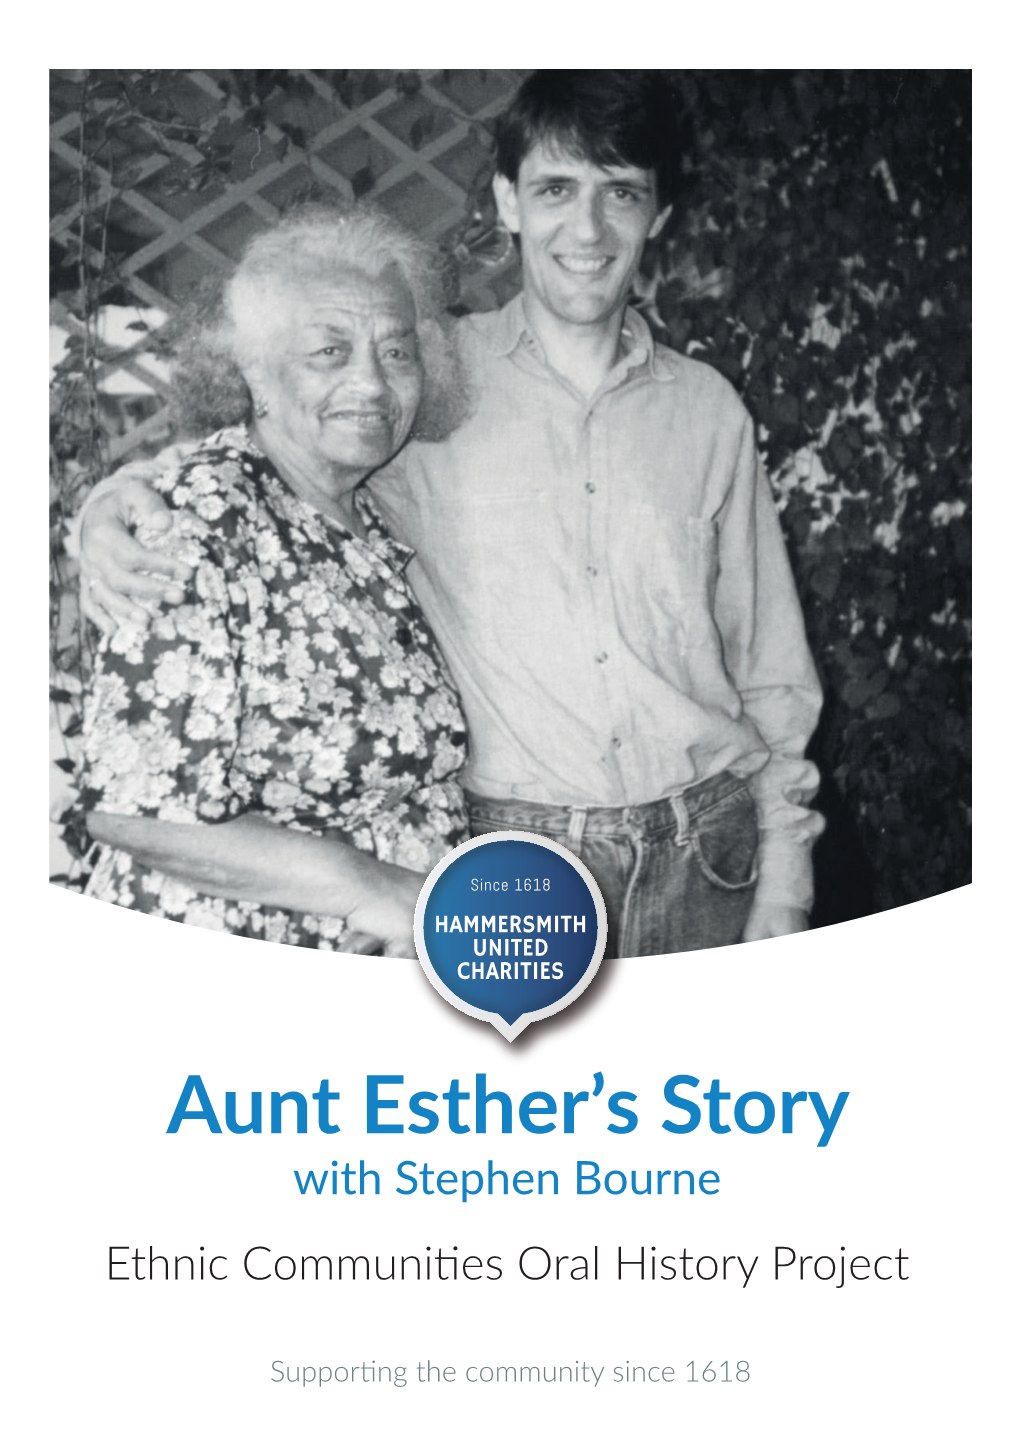 Aunt Esther's Story